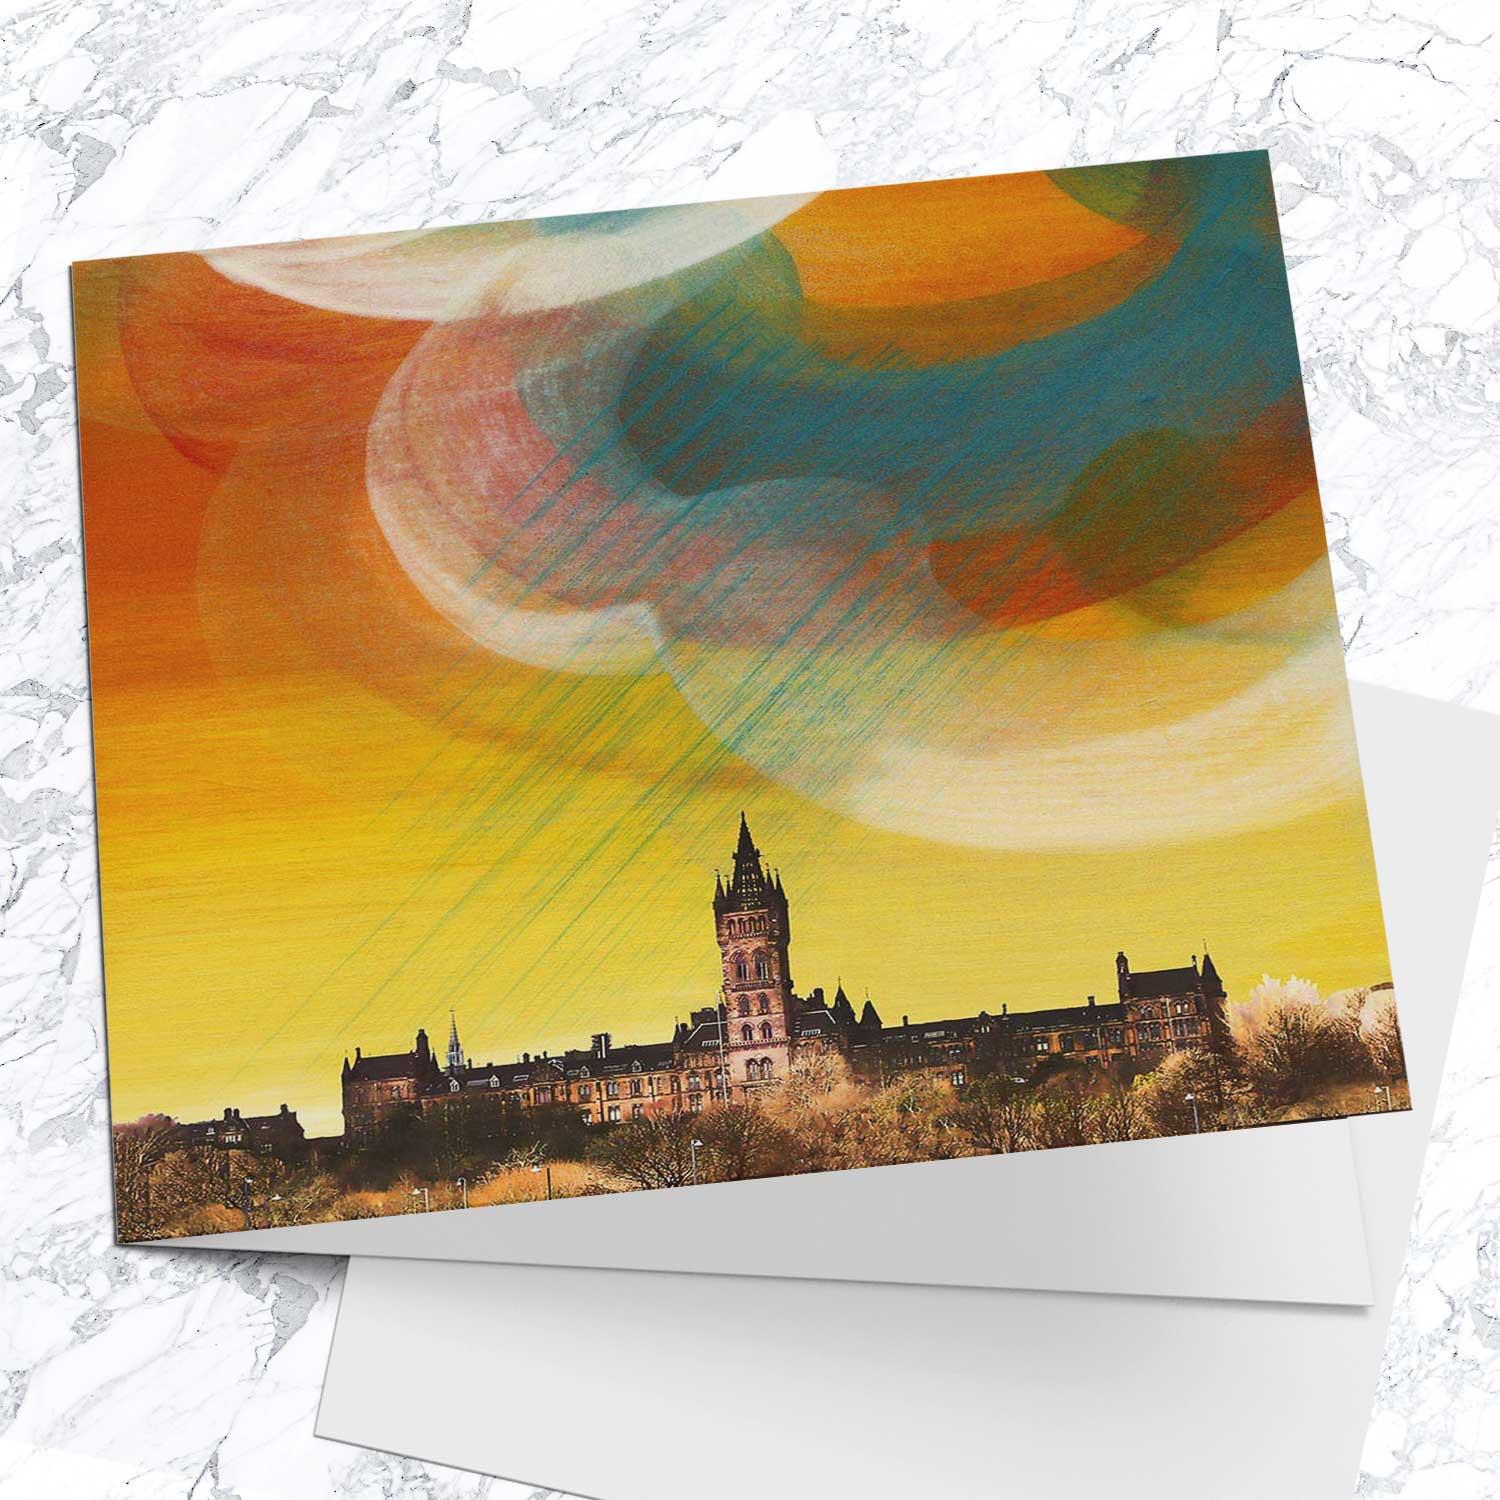 Glasgow University Greeting Card from an original painting by artist Esther Cohen